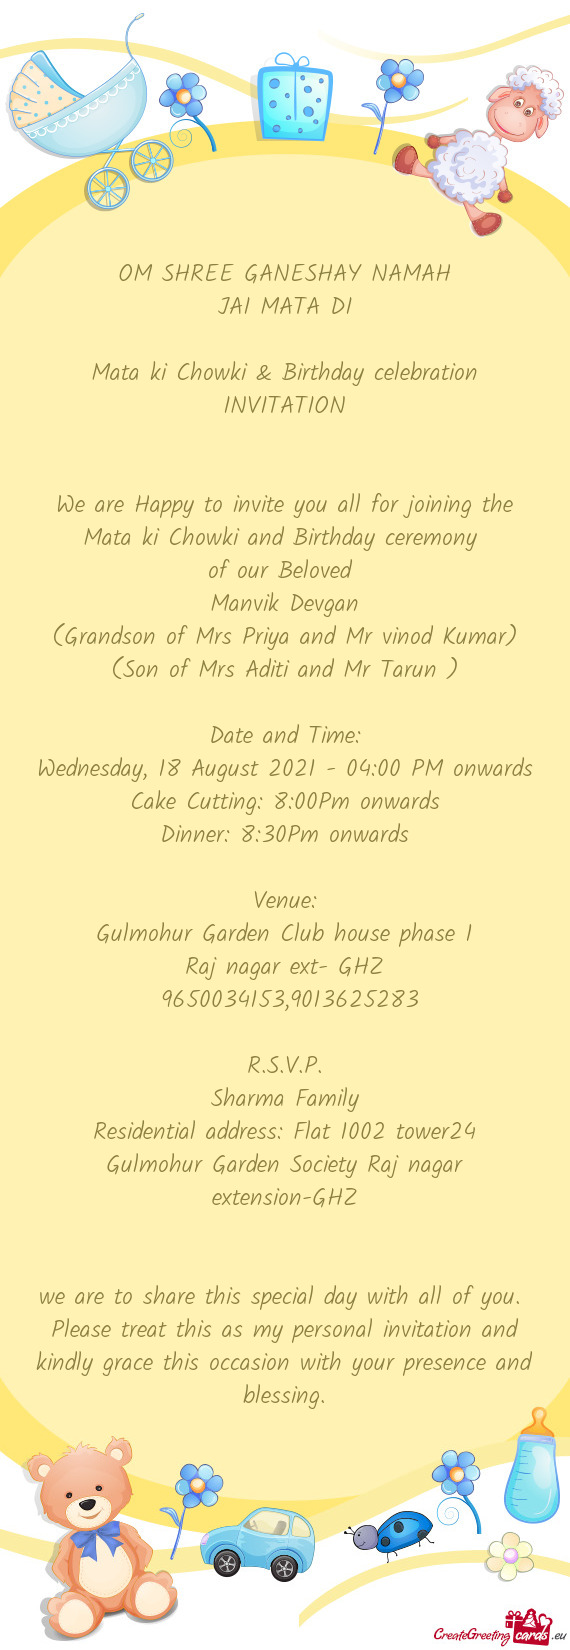 We are Happy to invite you all for joining the Mata ki Chowki and Birthday ceremony